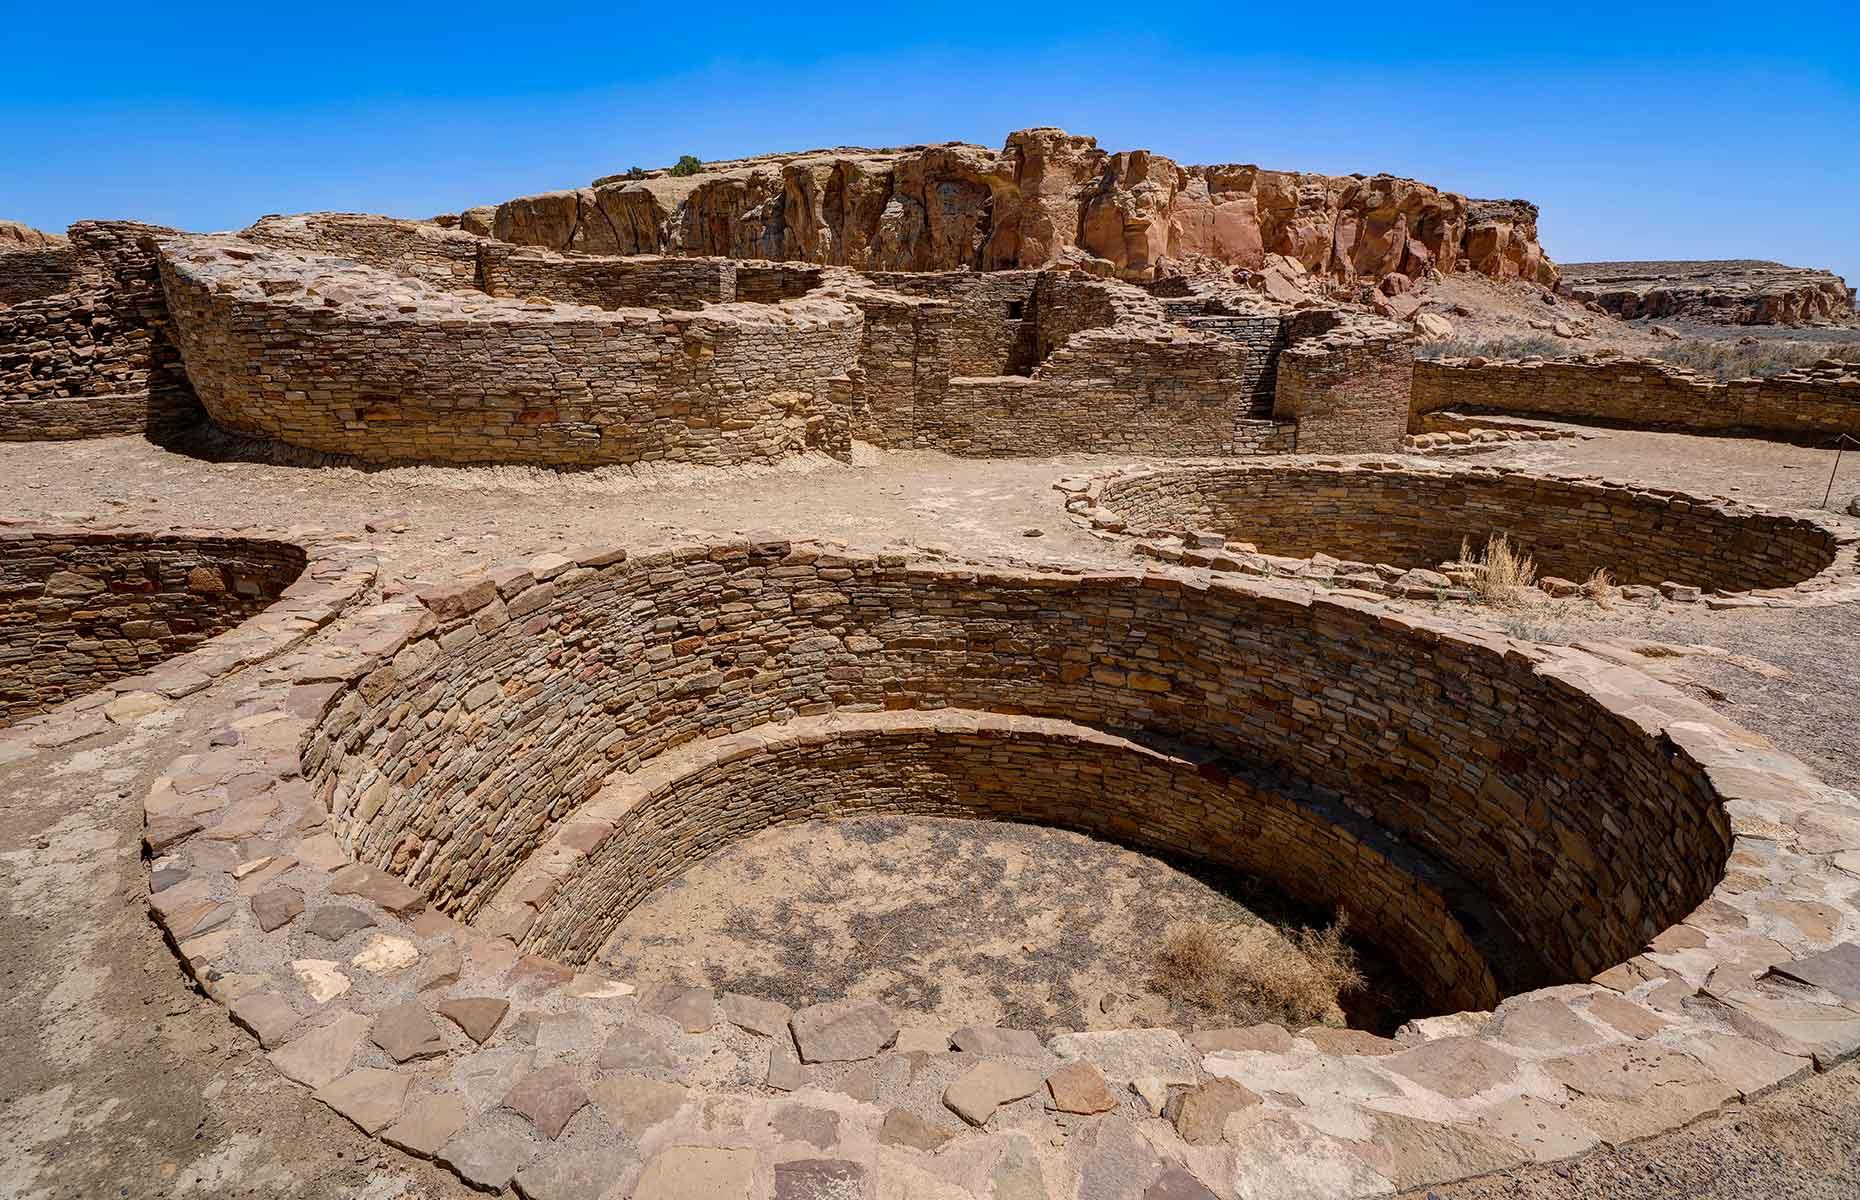 <p>New Mexico is brimming with ancient sites you can still visit, from the <a href="https://www.nps.gov/nr/travel/american_latino_heritage/taos_pueblo.html">Taos Pueblo</a> (built around AD 1325) which still houses permanent residents today, to the AD 1100 <a href="http://www.aztecnm.com/aztec/ruins.html">Aztec Ruins</a> located along the Trail of the Ancients Scenic Byway. <a href="https://www.nps.gov/chcu/index.htm">Chaco Culture National Historical Park</a> likely holds the oldest remains, with structures built from around AD 850. Chetro Ketl (pictured), a three-acre ceremonial site or royal palace, was built around AD 990. From the visitor center, a nine-mile loop road runs through five major sites, or you can book onto a guided Ranger tour.</p>  <p><a href="https://www.loveexploring.com/galleries/157264/inside-the-ancient-temples-of-the-americas?page=1"><strong>Venture inside the ancient temples of the Americas</strong></a></p>